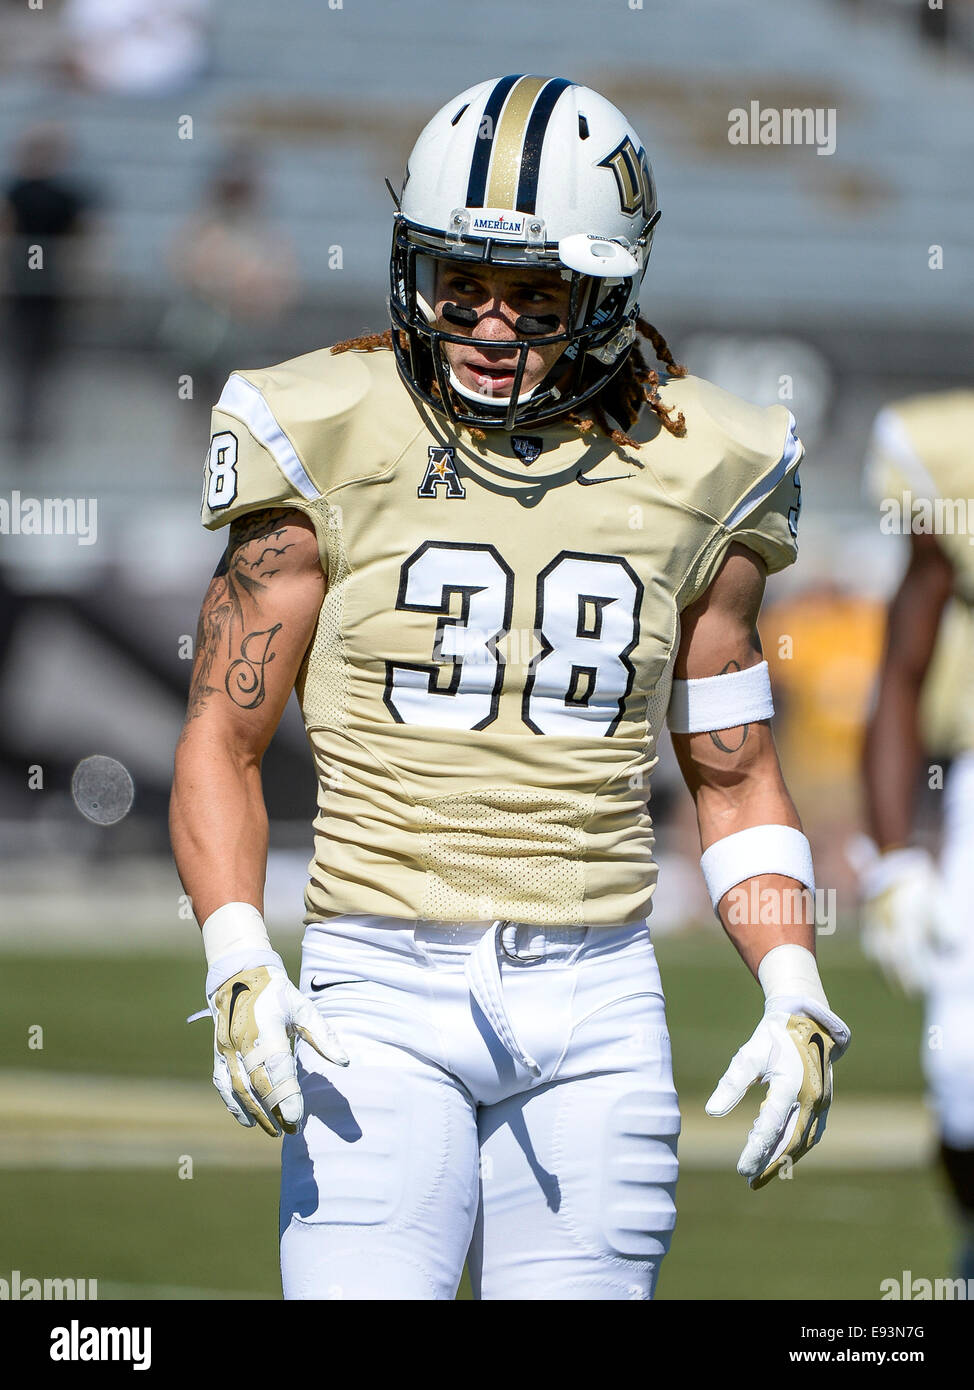 October 18, 2014 - Orlando, FL, U.S: UCF Knights defensive back Jordan  Ozerities (38) before the start of NCAA football game action between the  Tulane Green Wave and the UCF Knights at